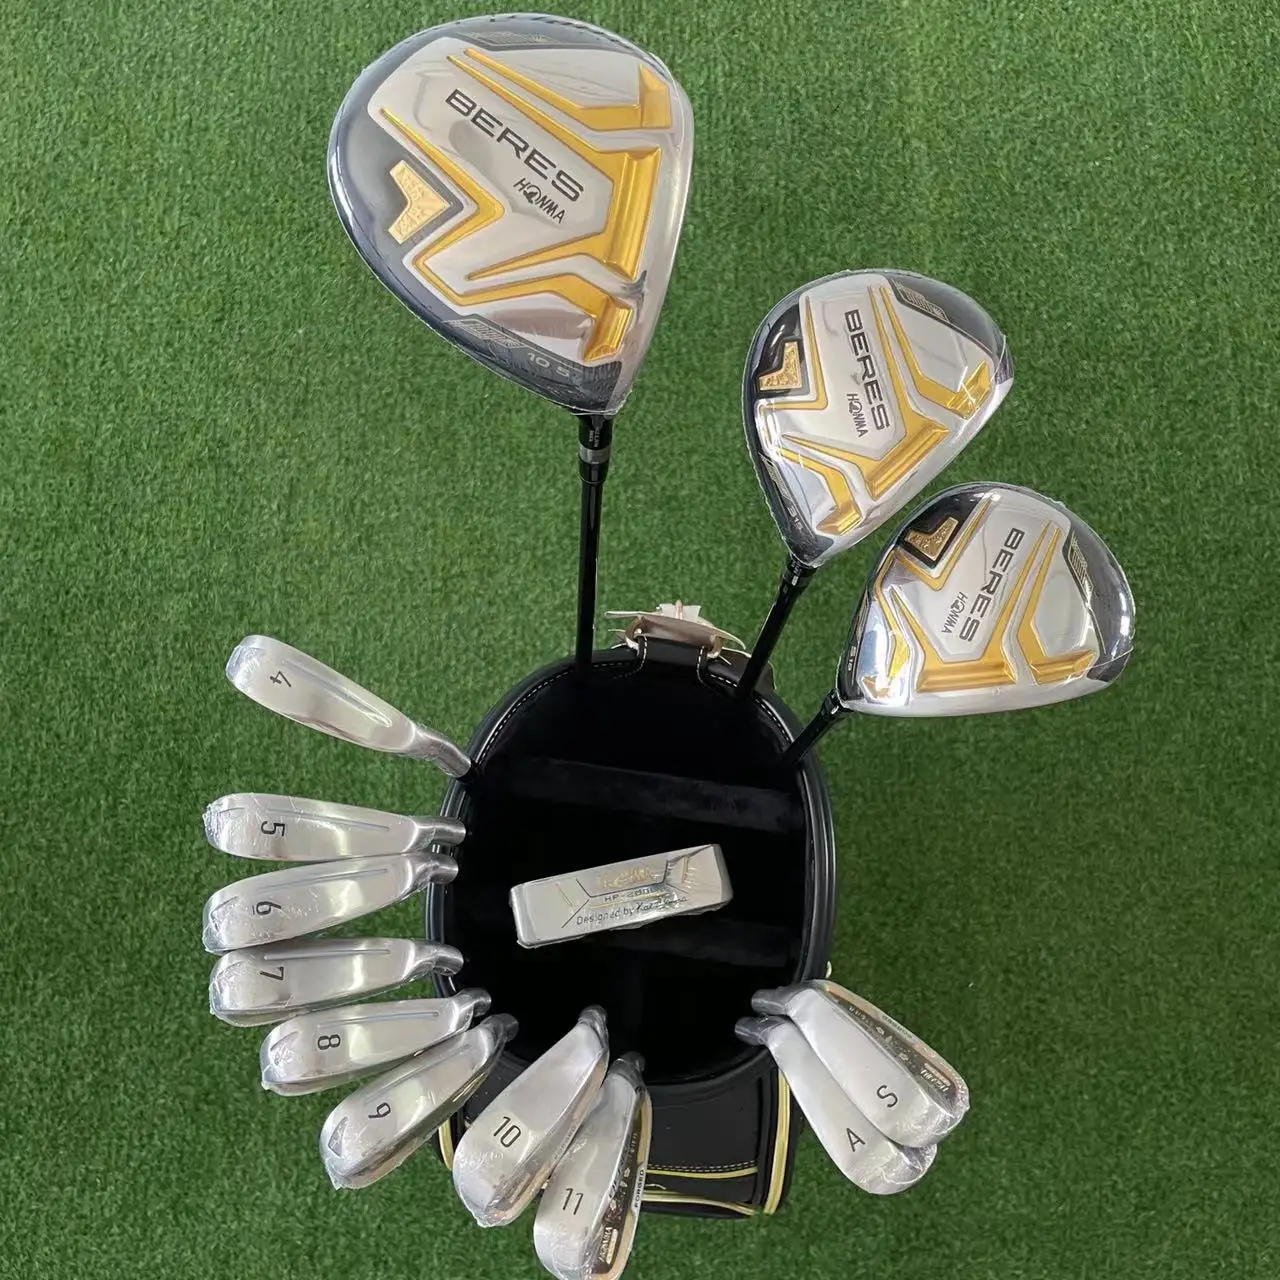 2022 New Honma IS 08 Golf Clubs Complete Set Driver+Fairway Wood+Putter+Iron Graphite Shaft With Headcover